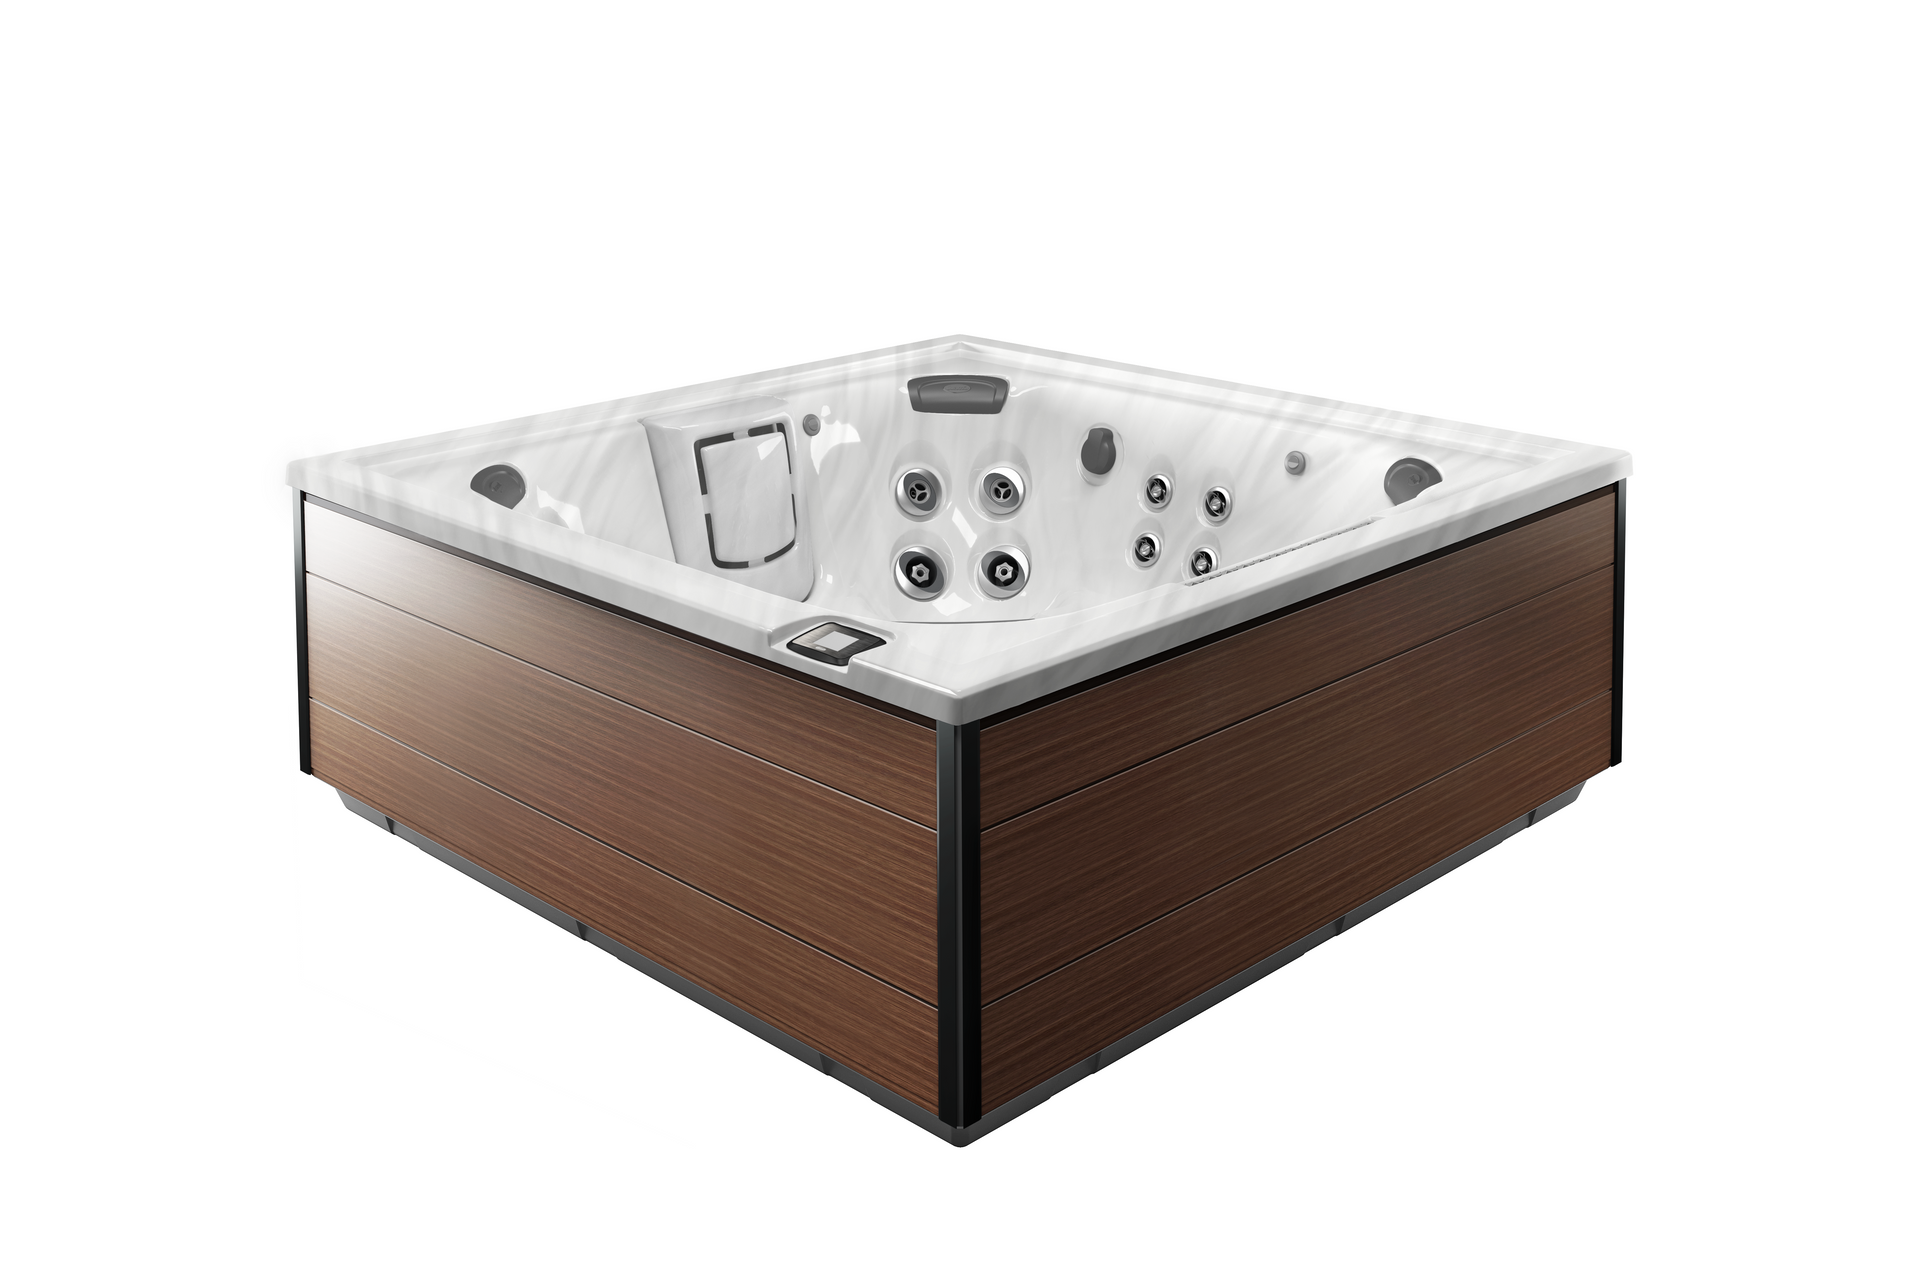 The  J-LX By Jacuzzi Offers Open & Ergonomic Seating